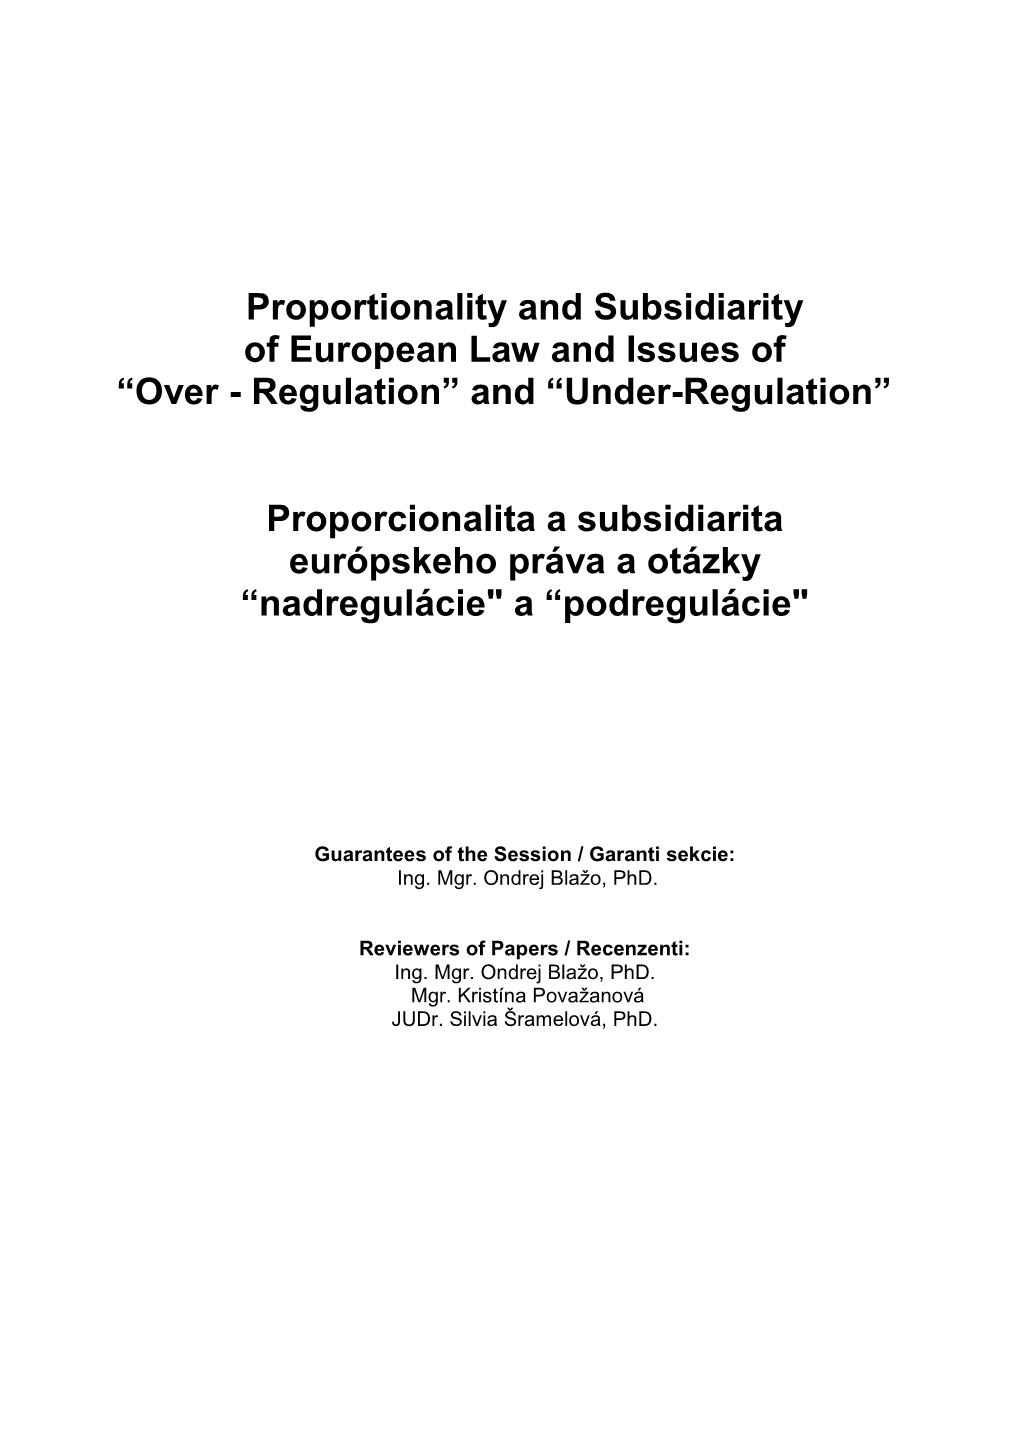 Proportionality and Subsidiarity of European Law and Issues of “Over - Regulation” and “Under-Regulation”